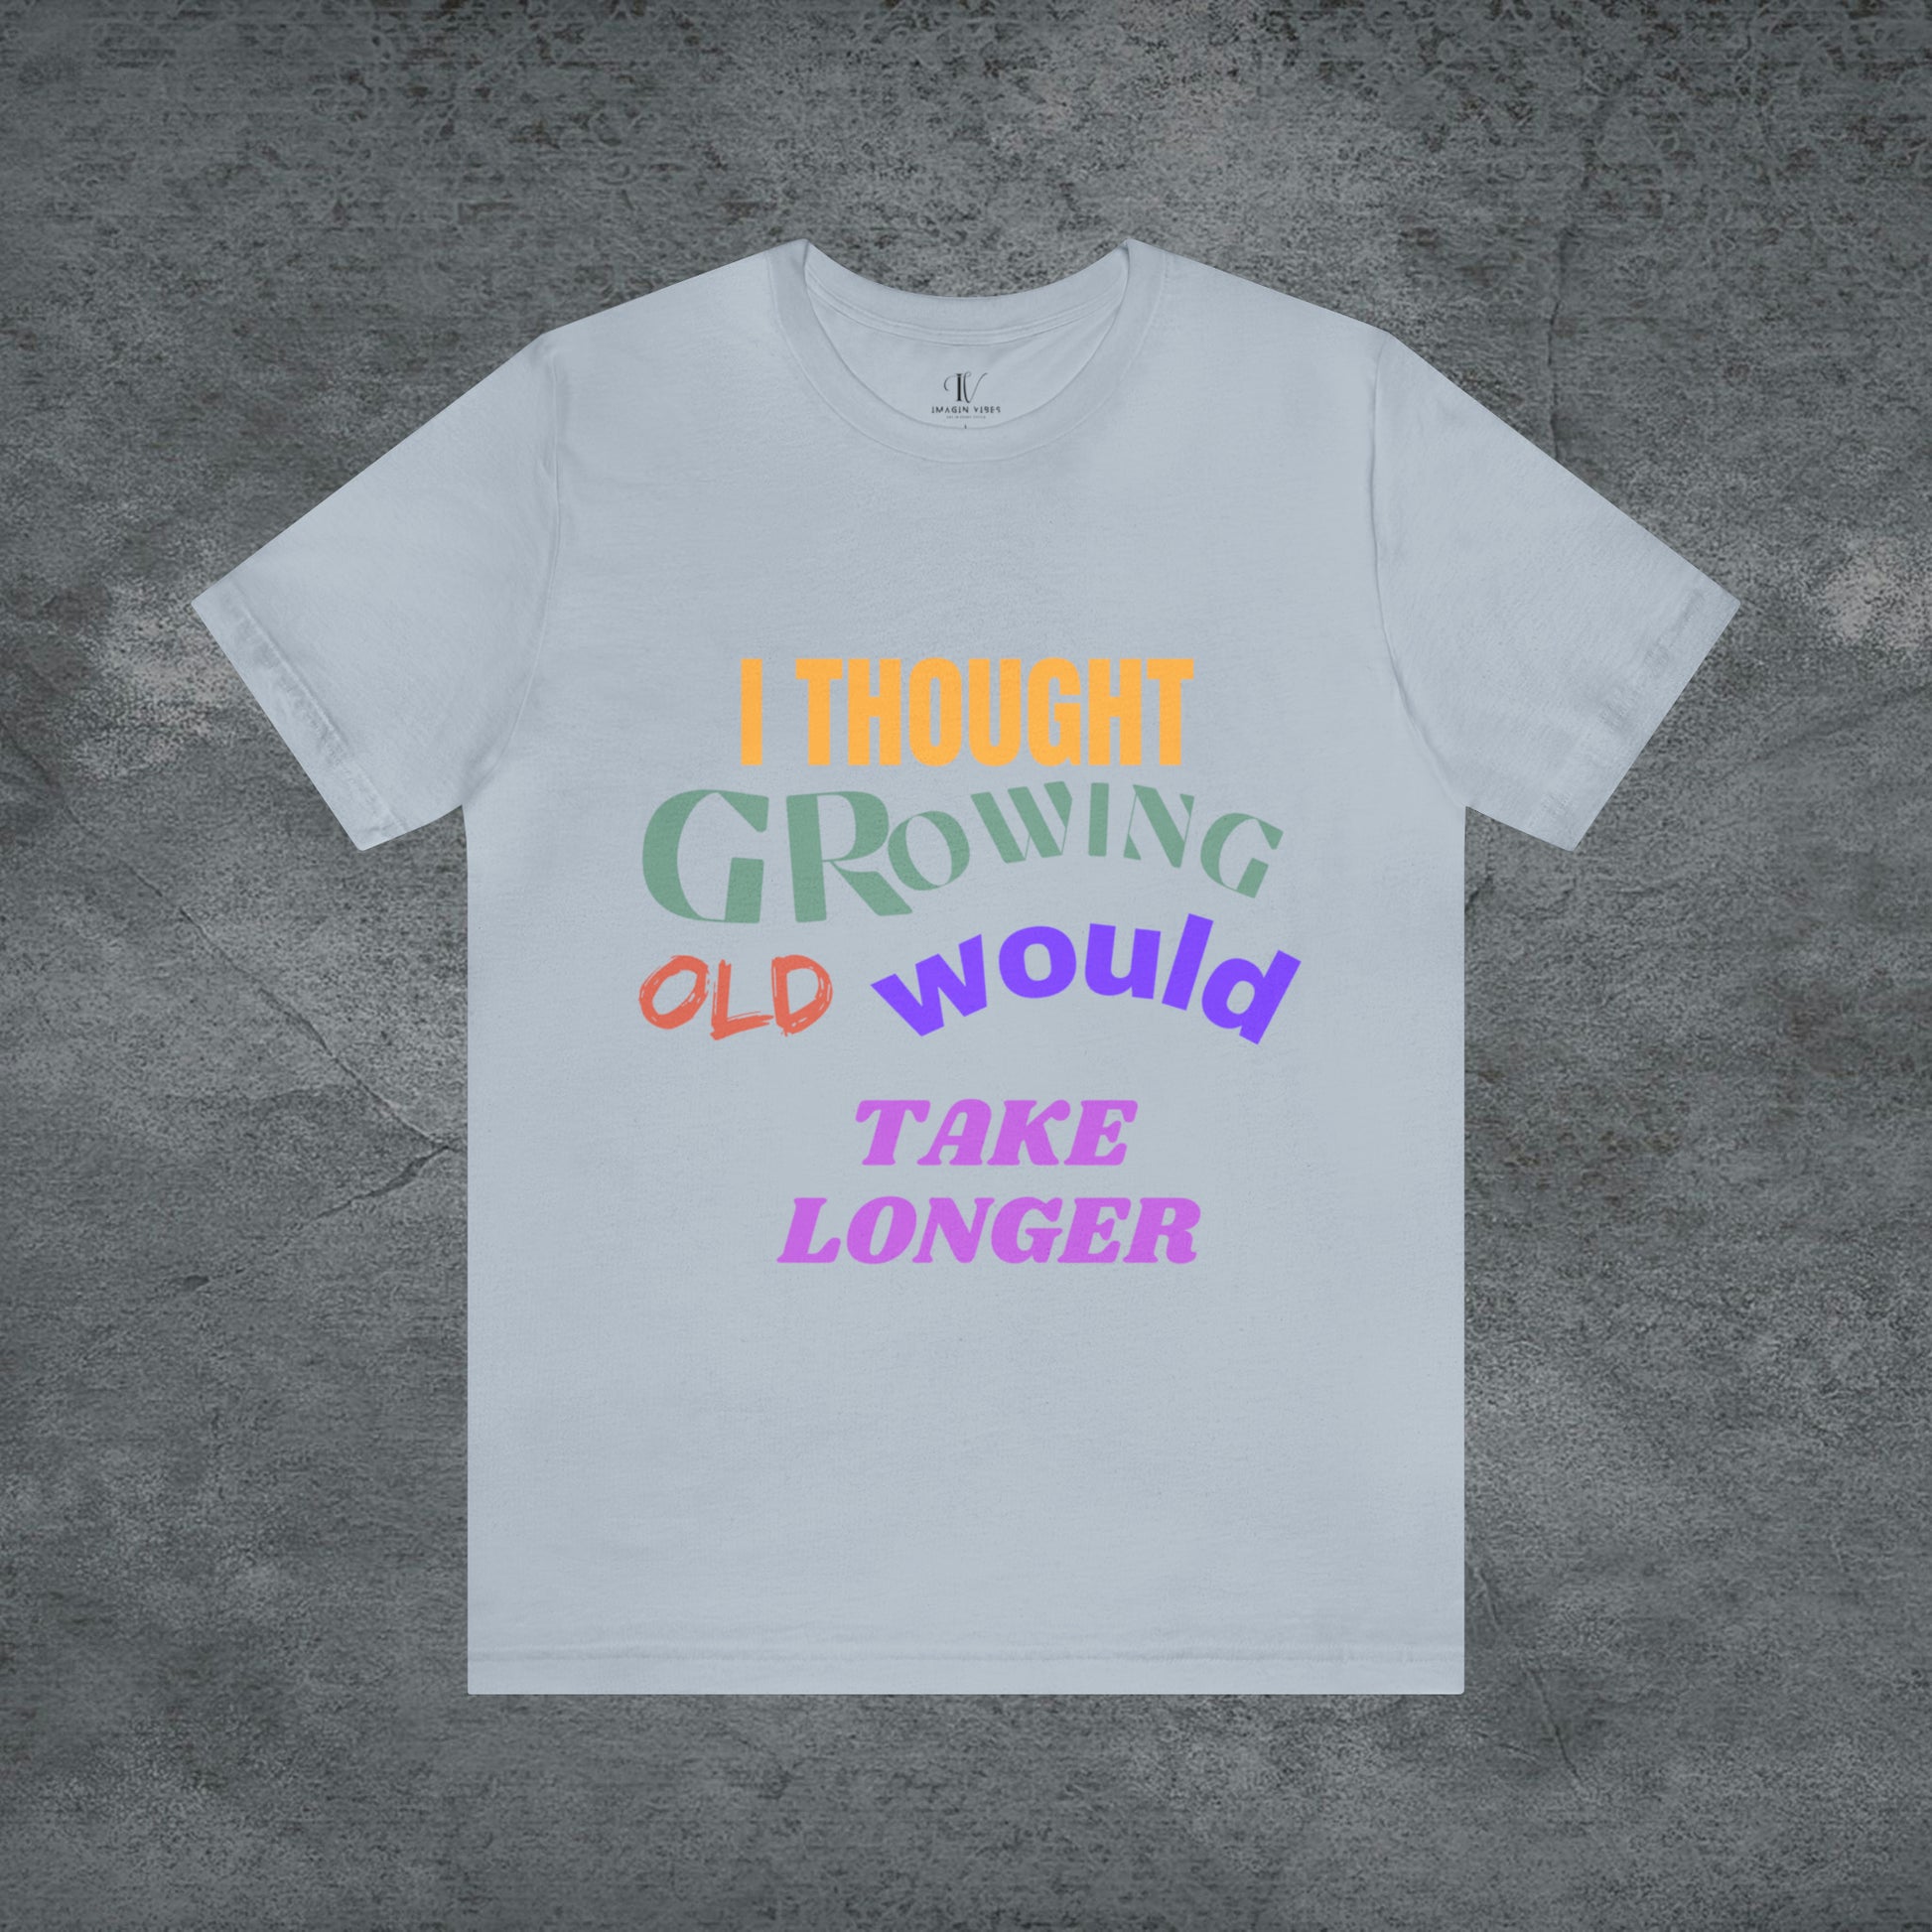 I Thought Growing Old Would Take Longer T-Shirt - Getting Older T-Shirt - Funny Adulting Tee - Old Age T-Shirt - Old Person T-Shirt T-Shirt Light Blue S 